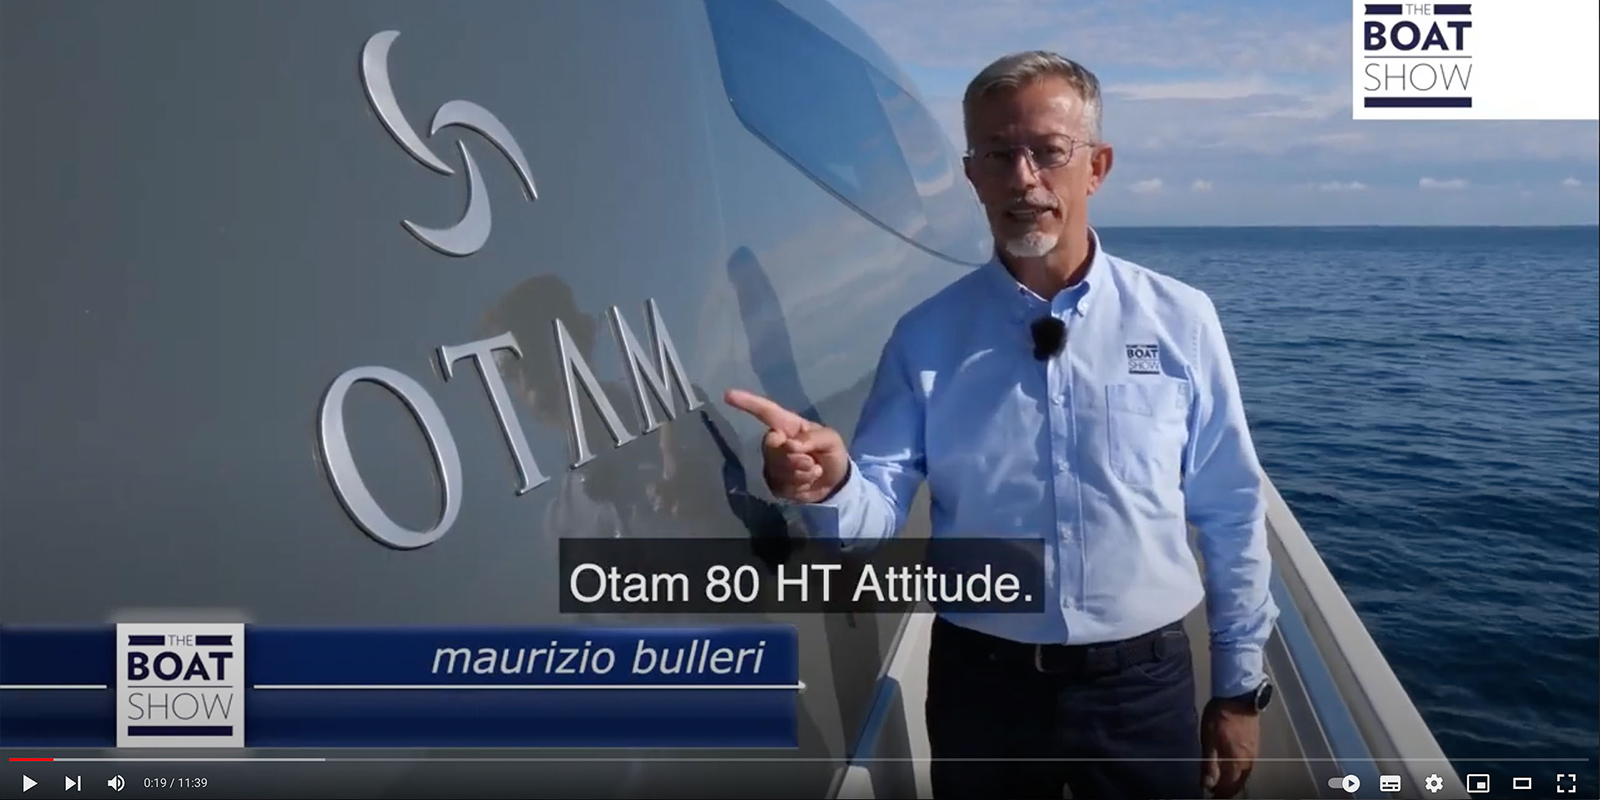 OTAM 80 HT - PERFORMANCE MOTOR YACHT EXCLUSIVE REVIEW